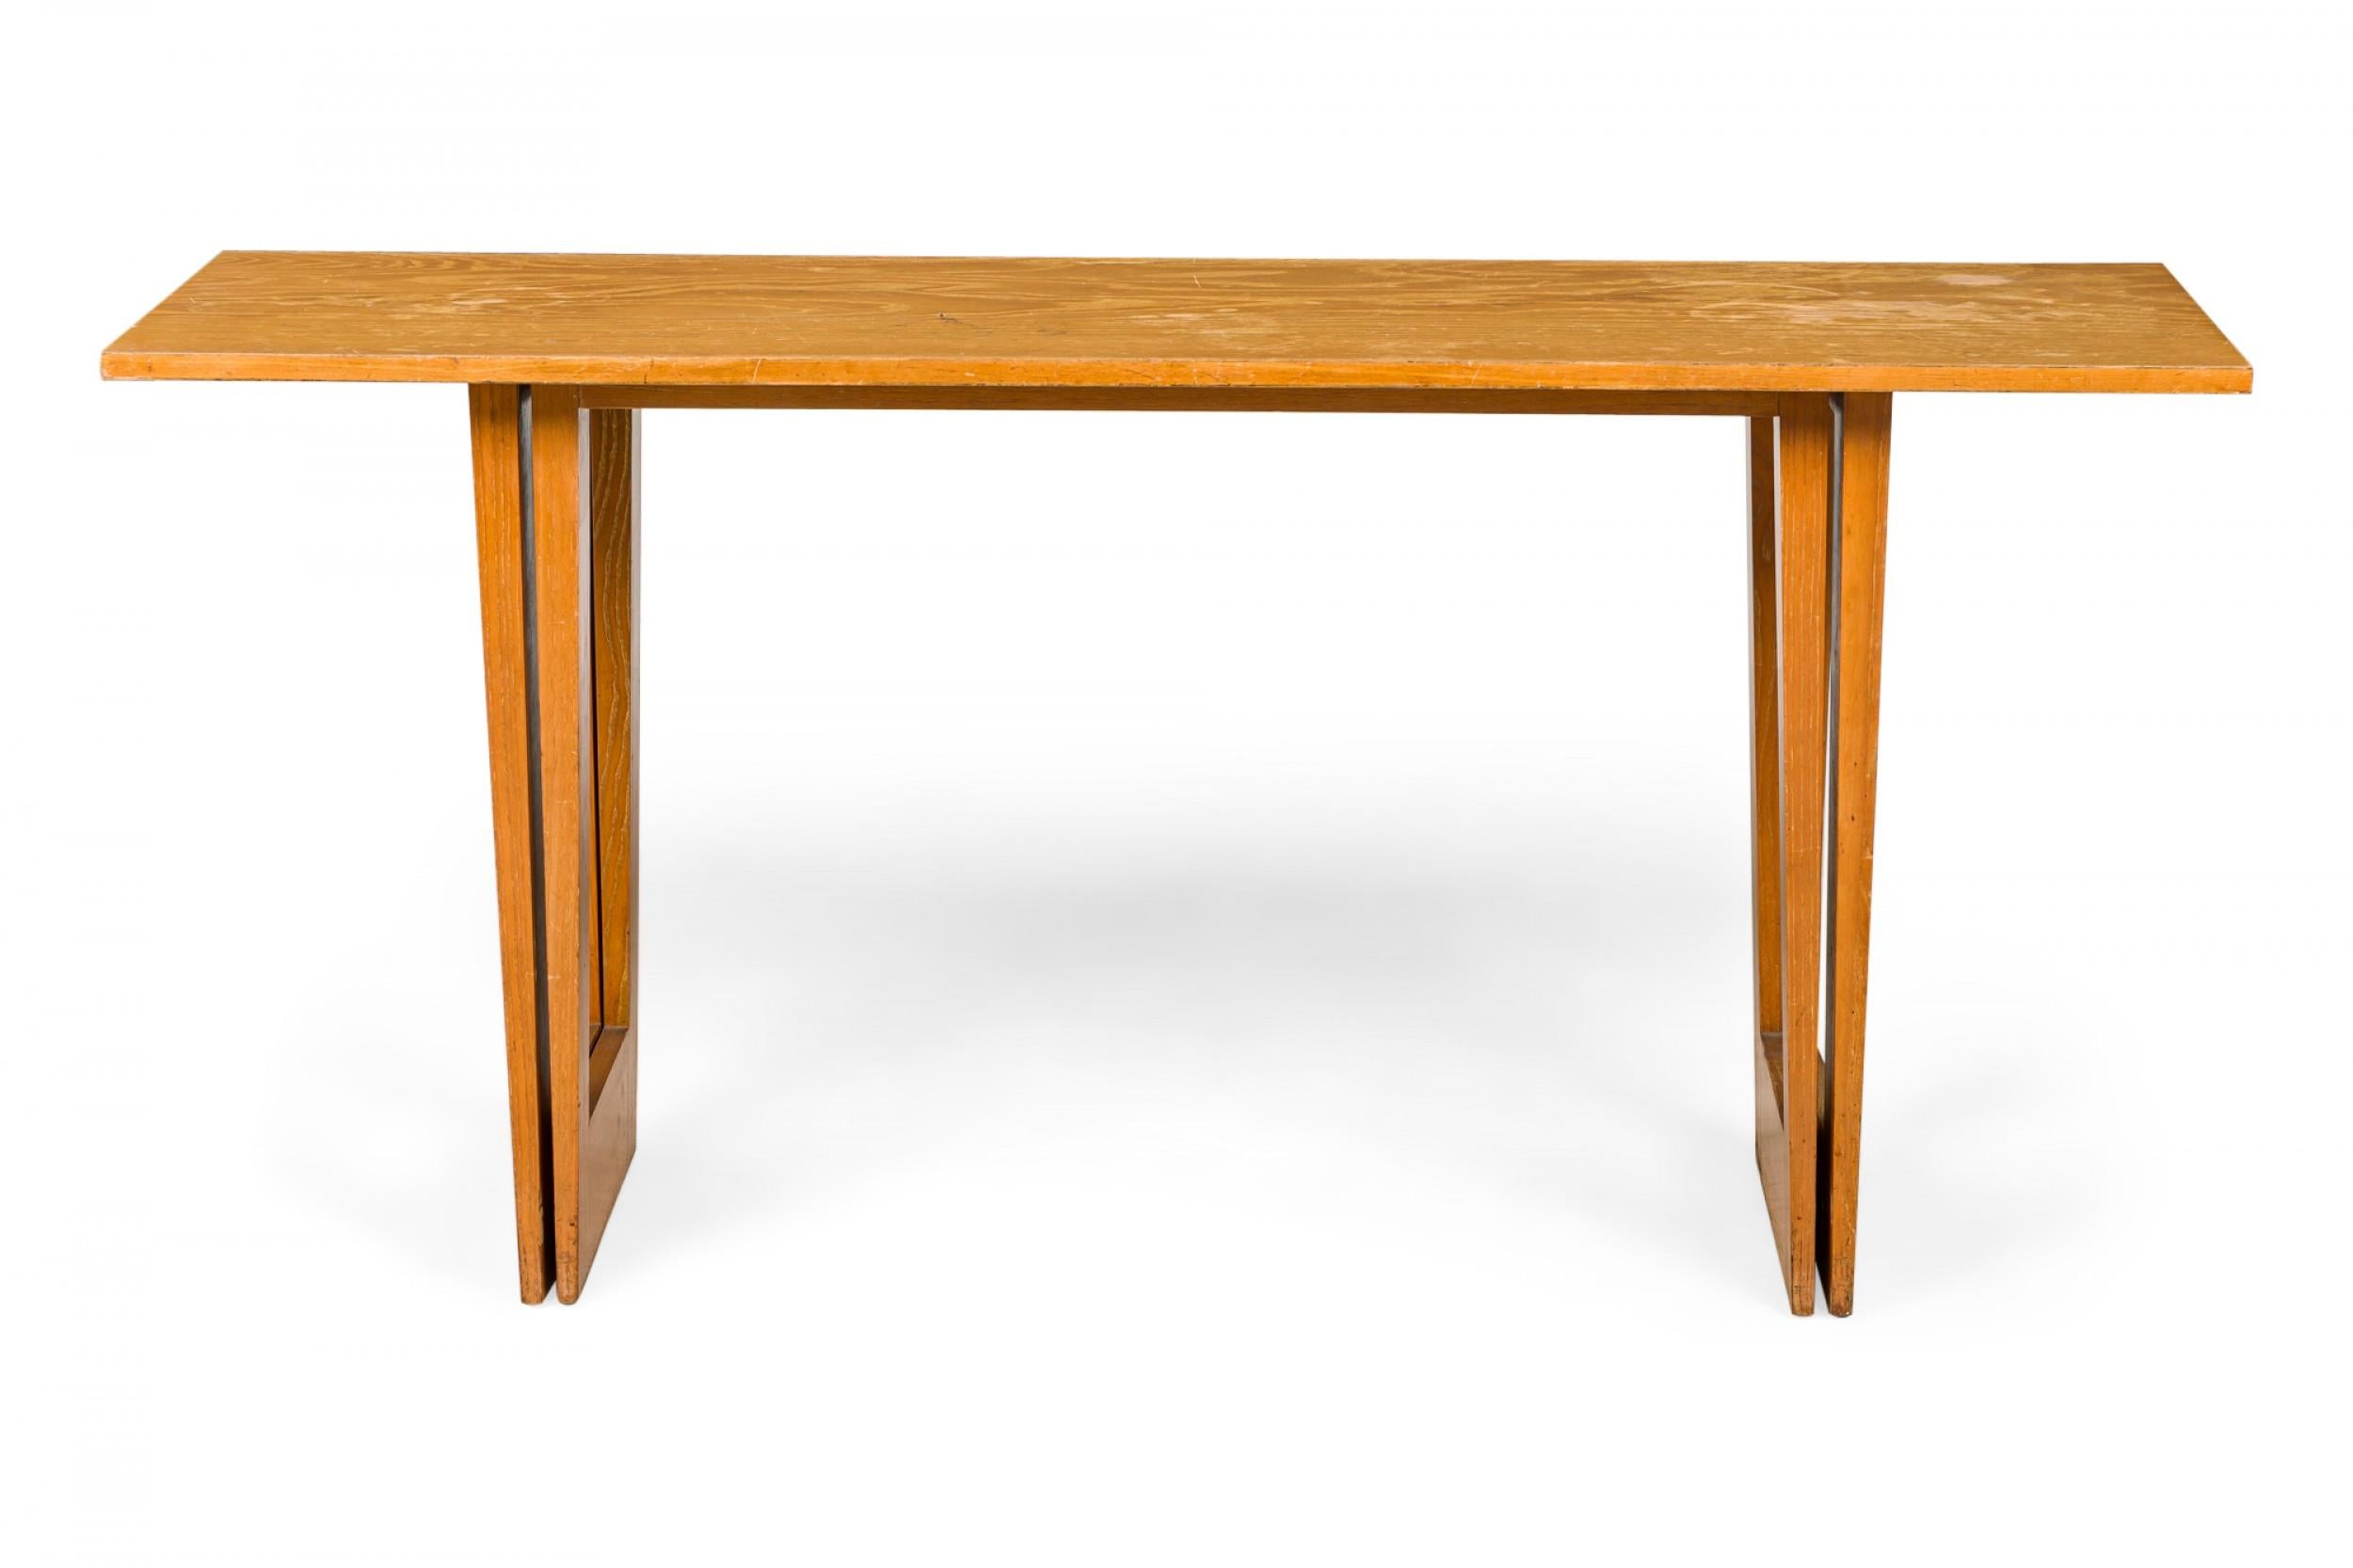 American Mid-Century console / dinette table with a rectangular wooden flip top. (PAUL LASZLO FOR BROWN SALTMAN).